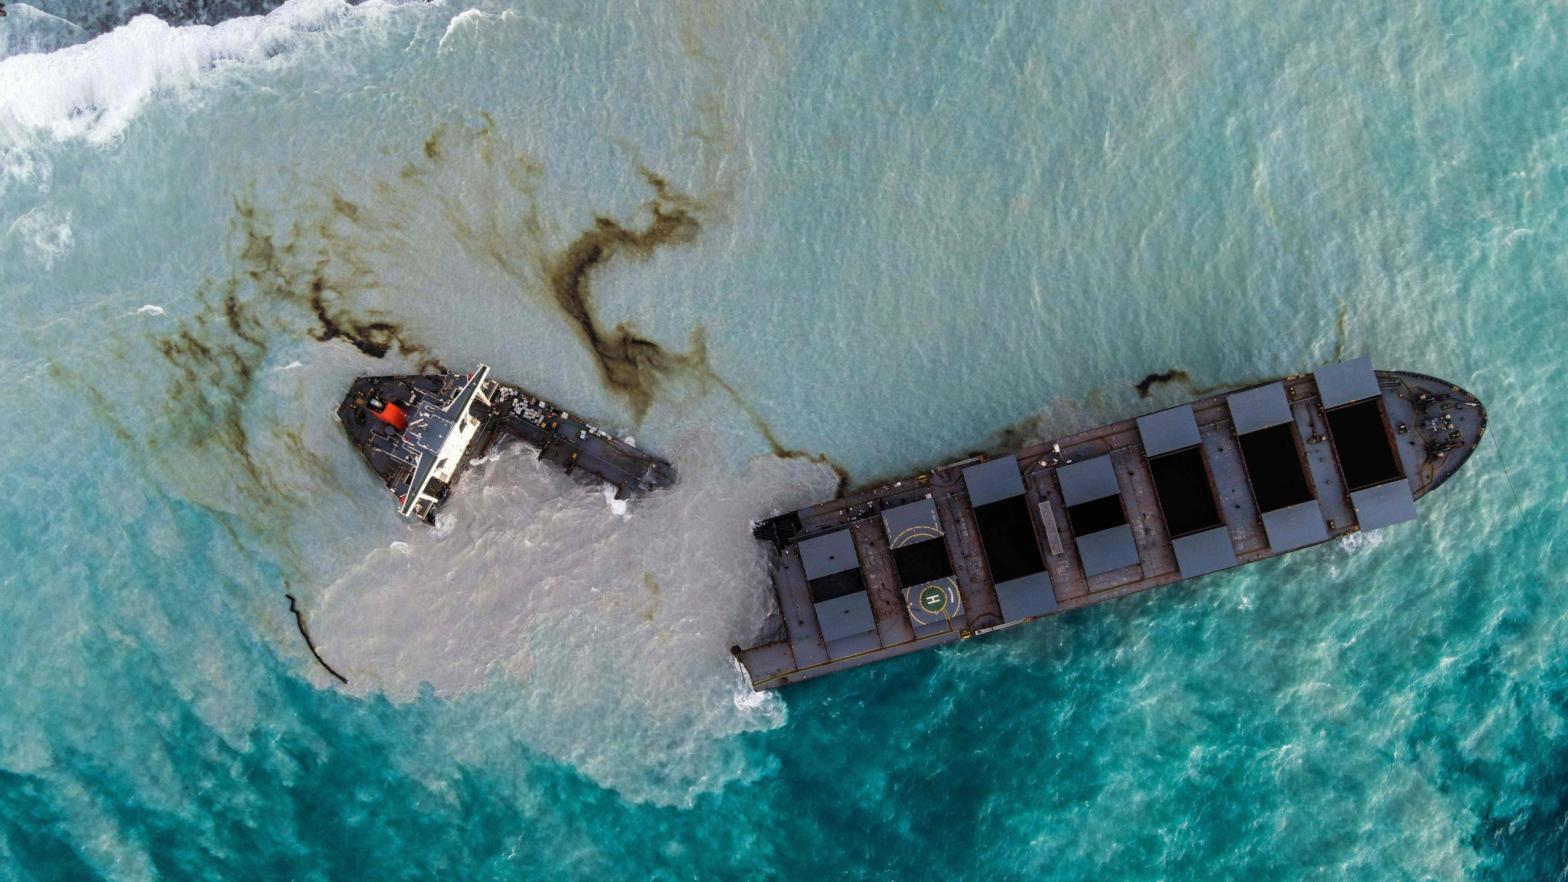 A ship that has leaked more than 1,000 metric tons of oil in pristine waters off the Mauritius coast broke in two on Saturday, and rough seas are making it difficult for salvage teams to respond quickly. (Photo: Stringer, Getty Images)